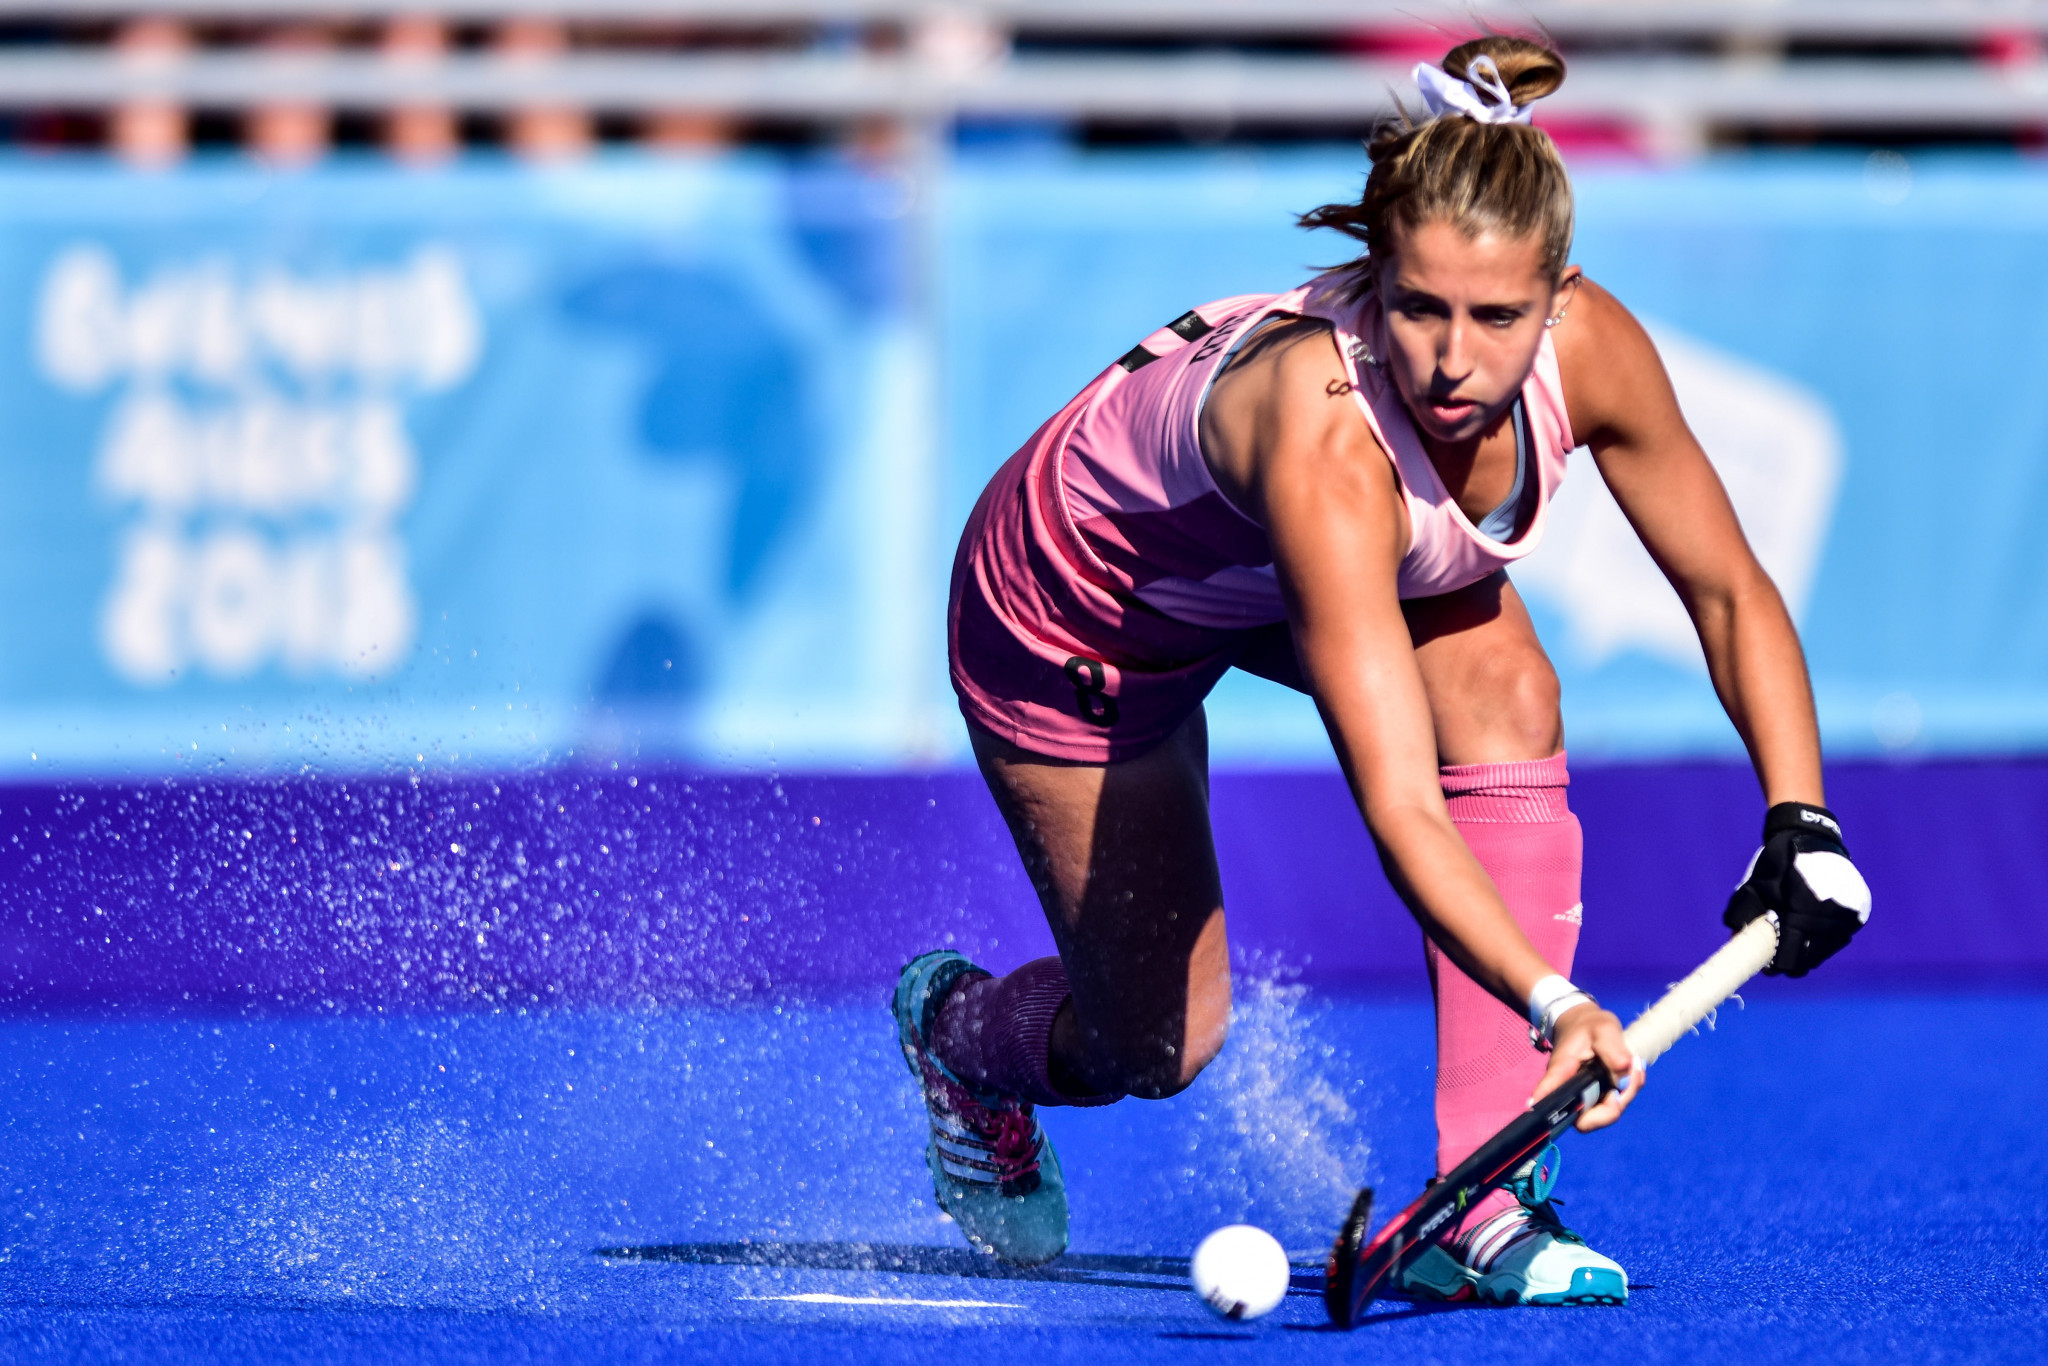 Hockey 5s featured on the programme of the Singapore 2014 and Buenos Aires 2018 Youth Olympic Games ©Getty Images